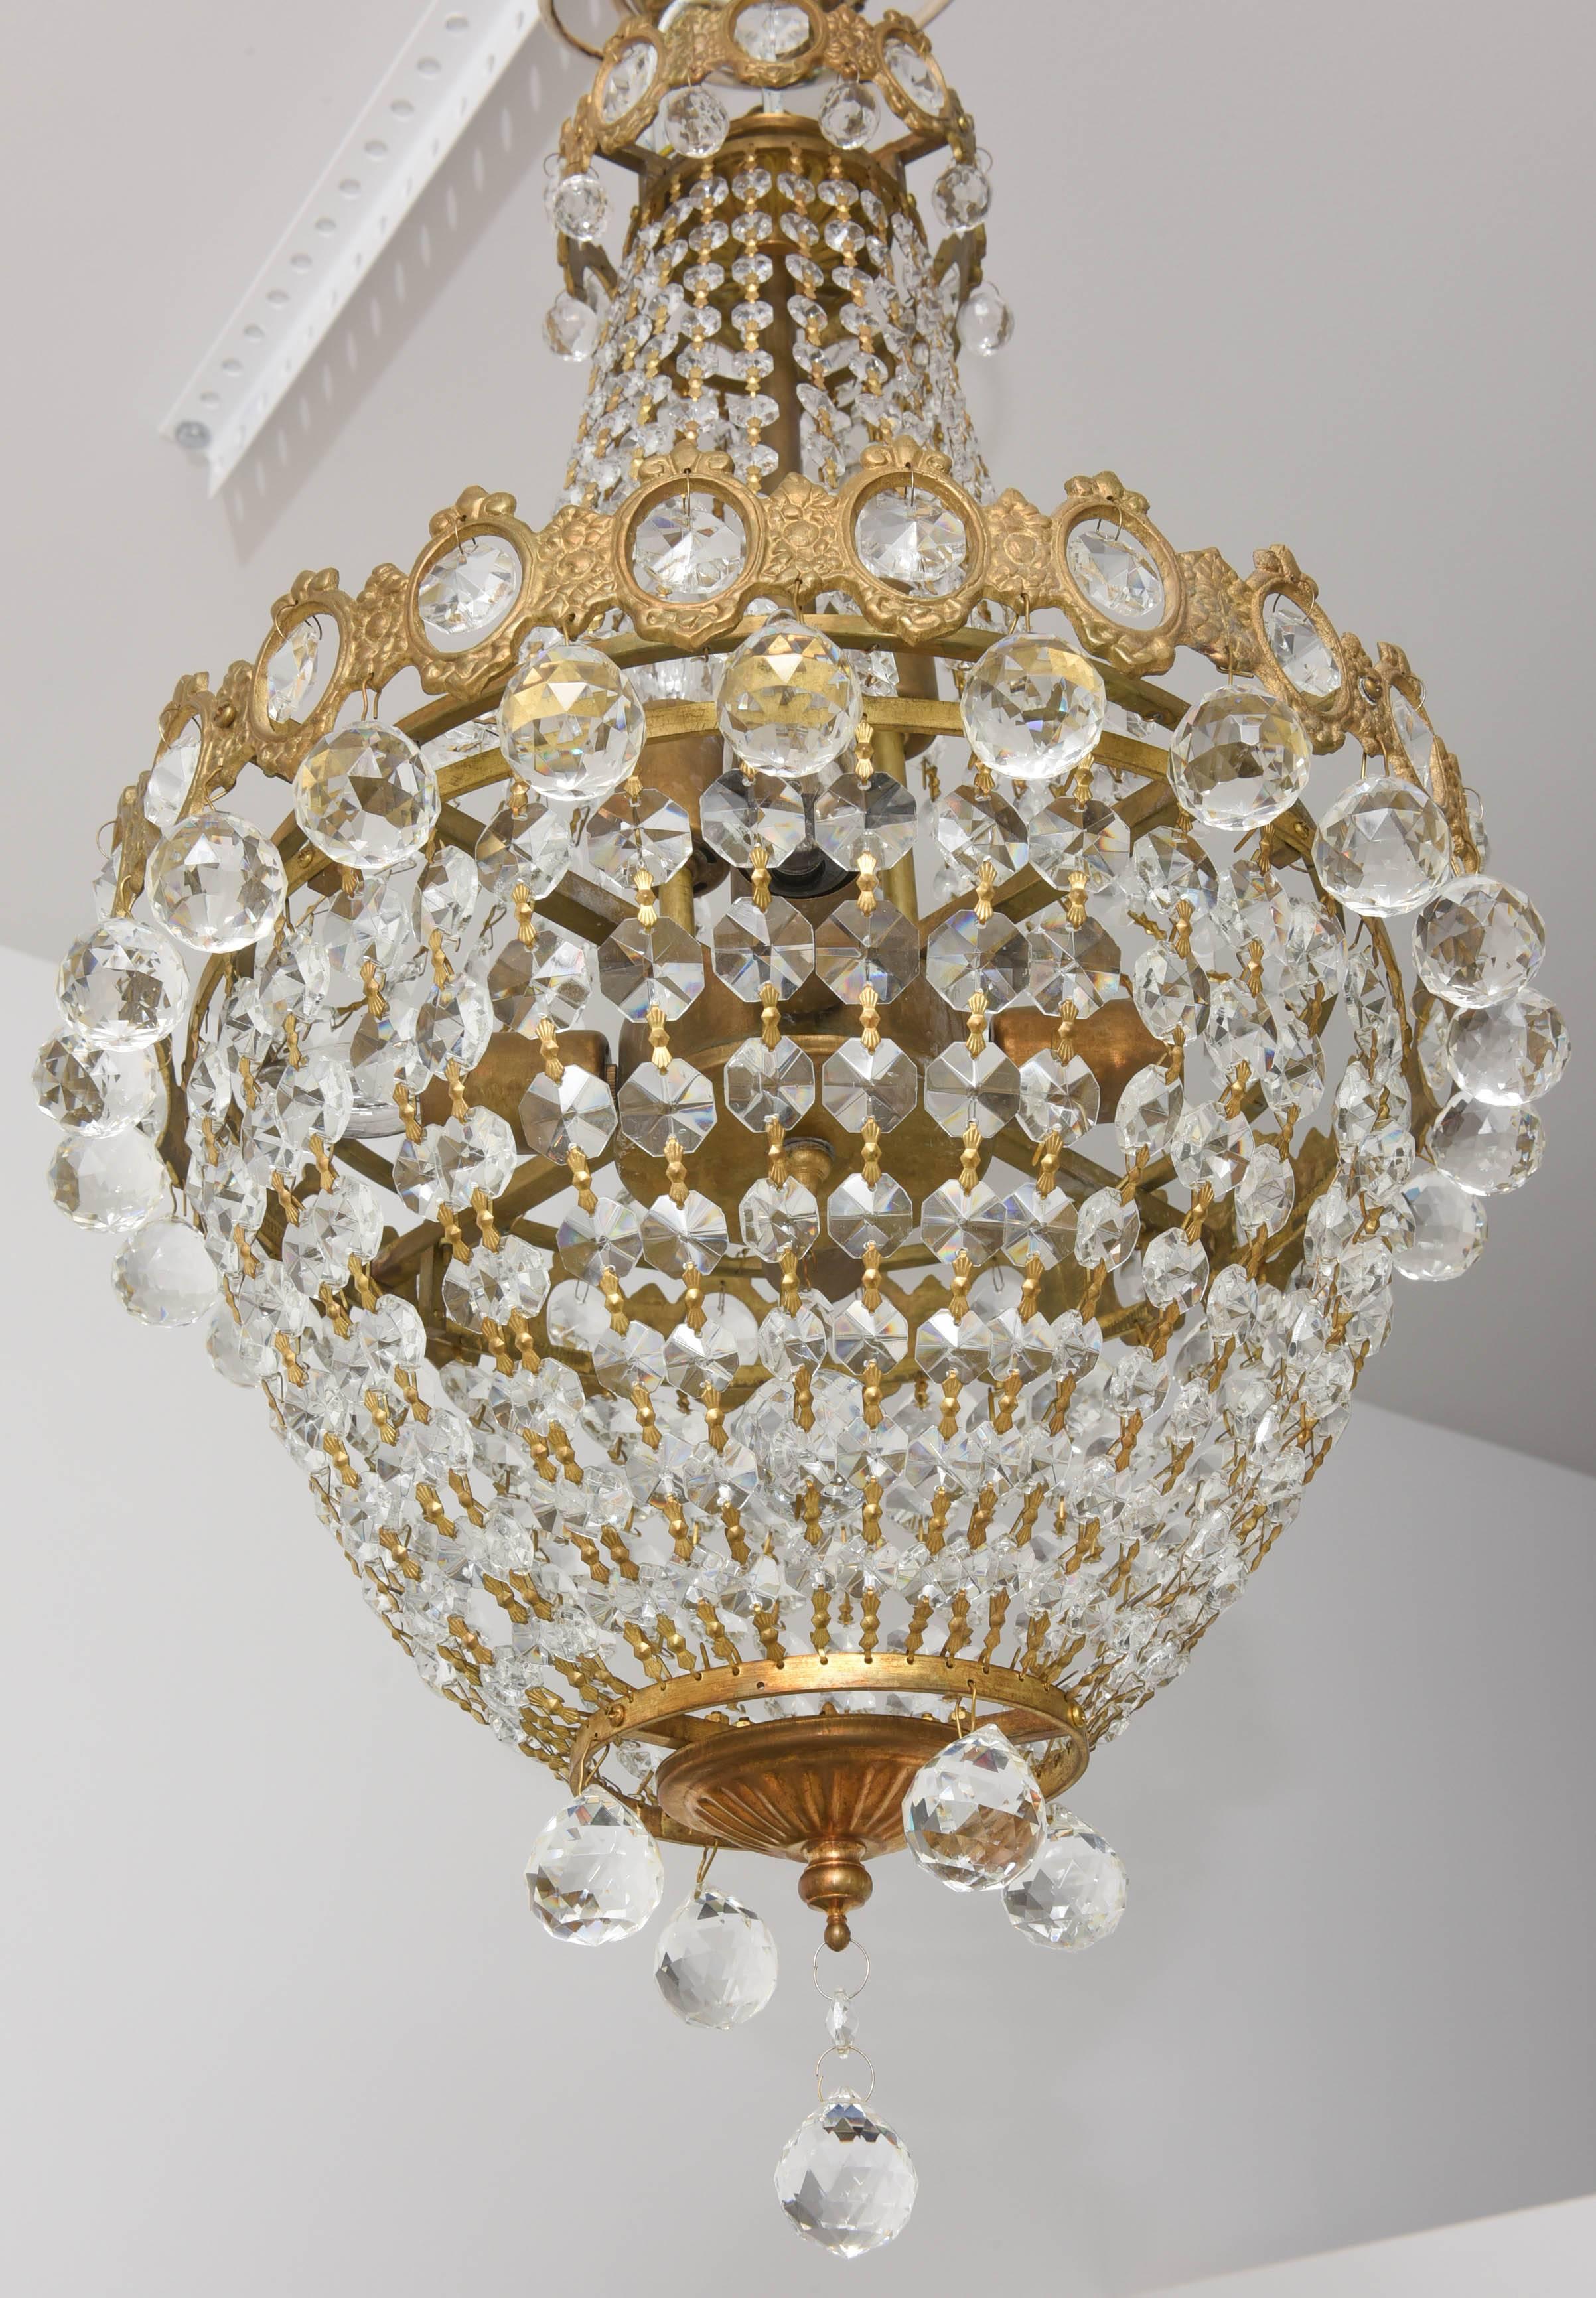 This beautiful Hollywood Regency style chandelier takes its inspiration from the court of Louis XVI. The brass has mellowed to an antique color which works beautifully with the faceted crystals. 

Note: This piece requires six candelabra based